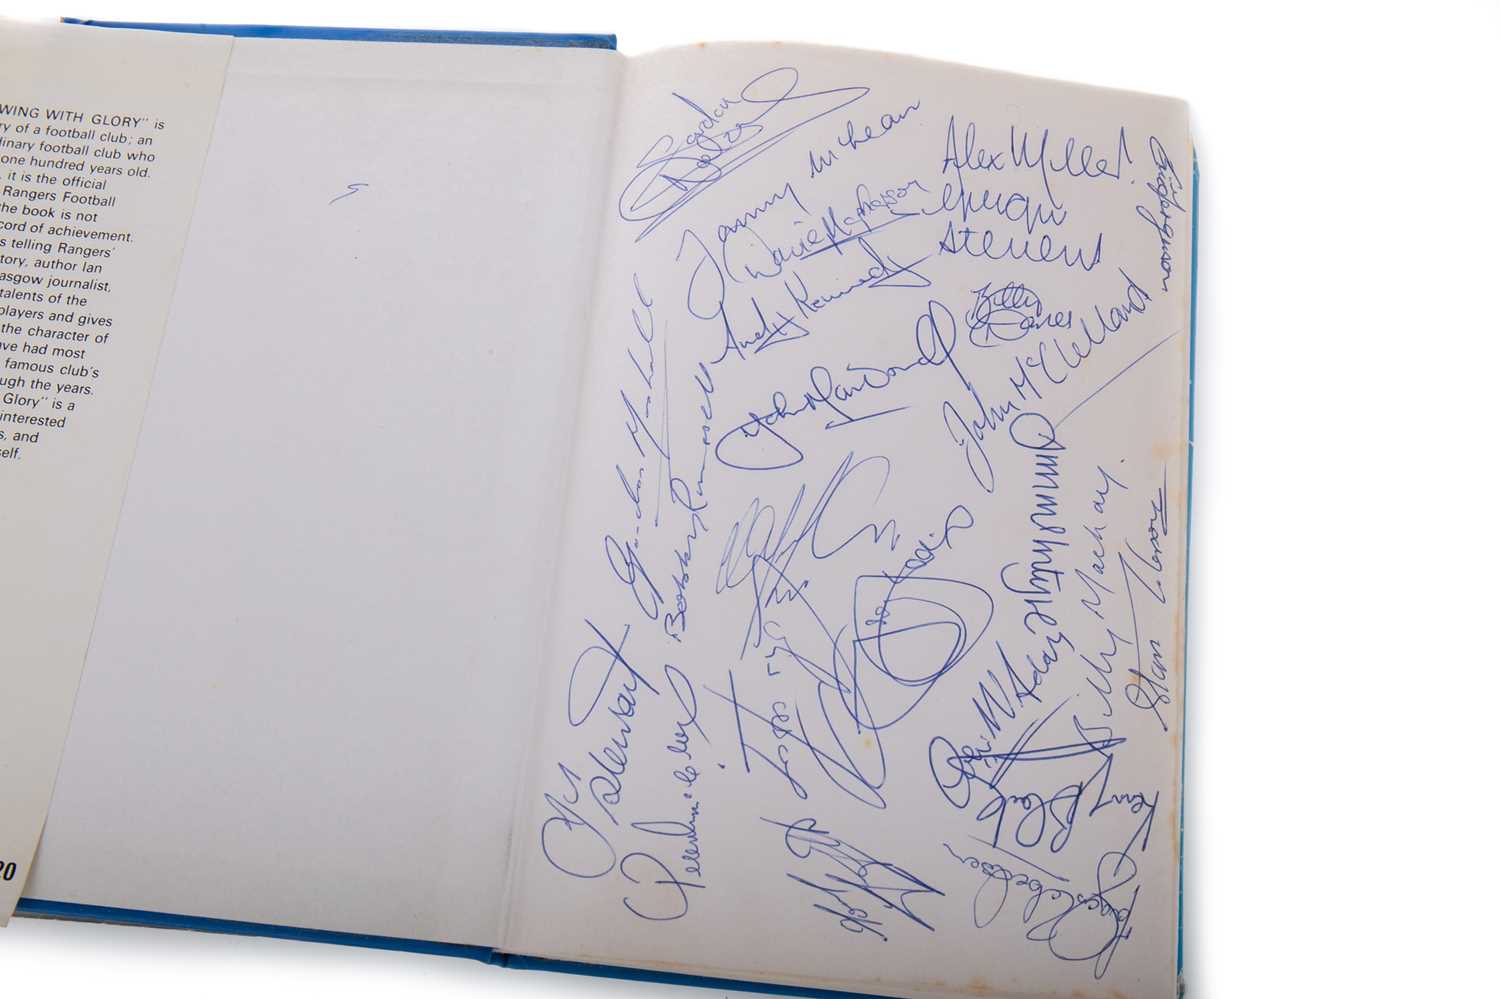 AUTOGRAPHED COPY OF GROWING WITH GLORY: 1873 THE 100 YEAR STORY OF RANGERS F.C. 1973, PEEBLES (IAN), - Image 2 of 2